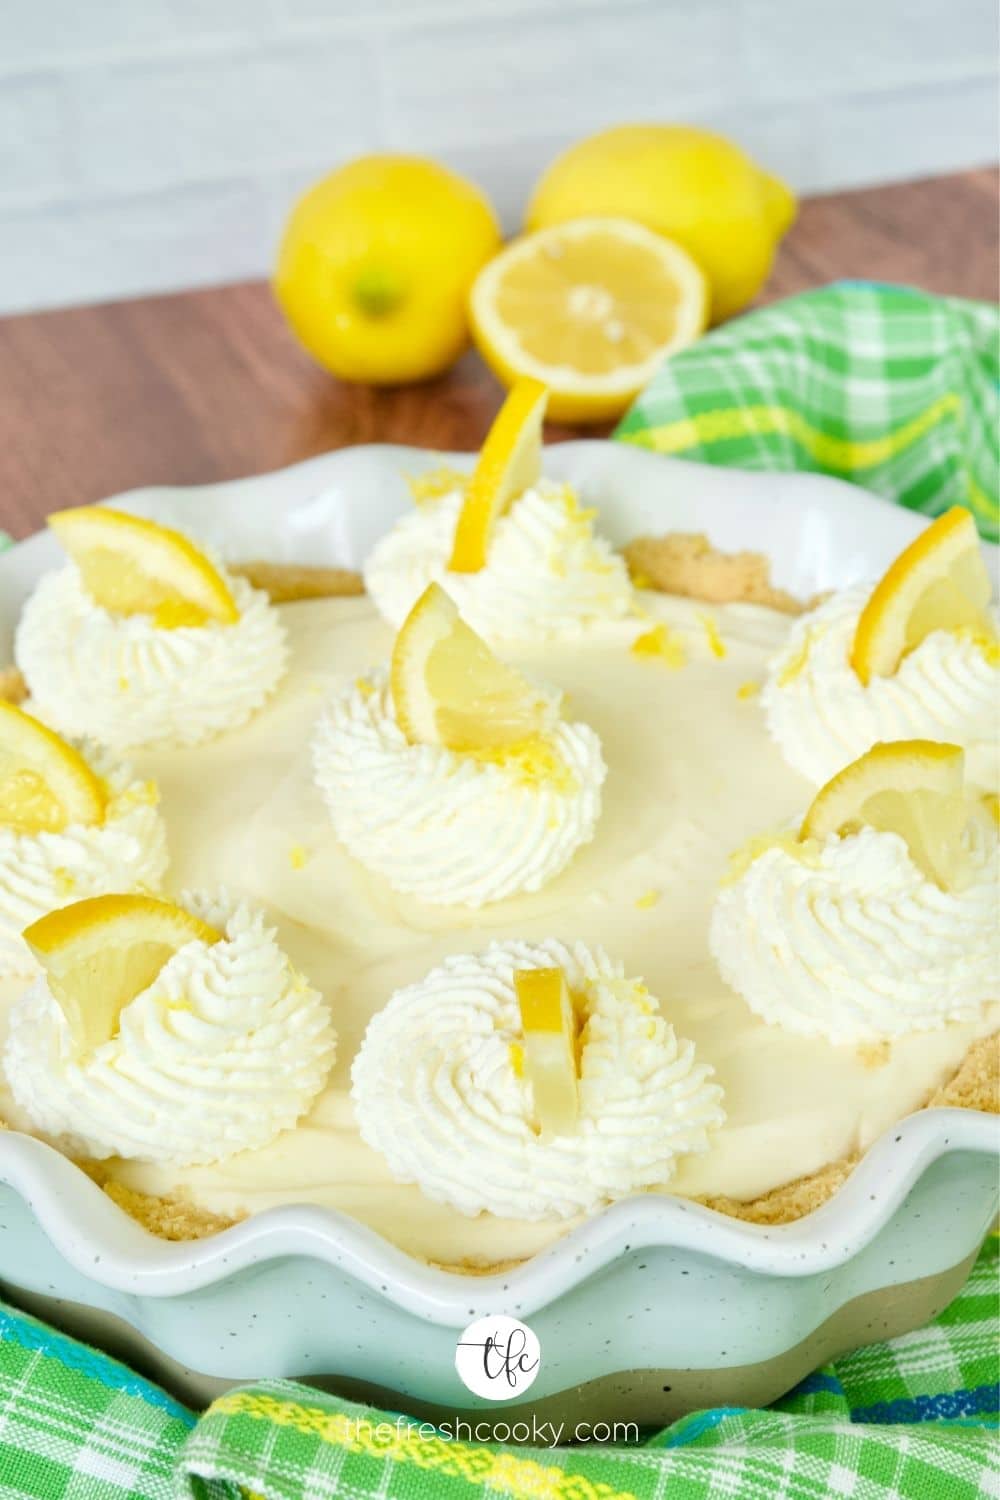 Lemon Cream pie with swirls of whipping cream, topped with lemon wedges and lemon zest.